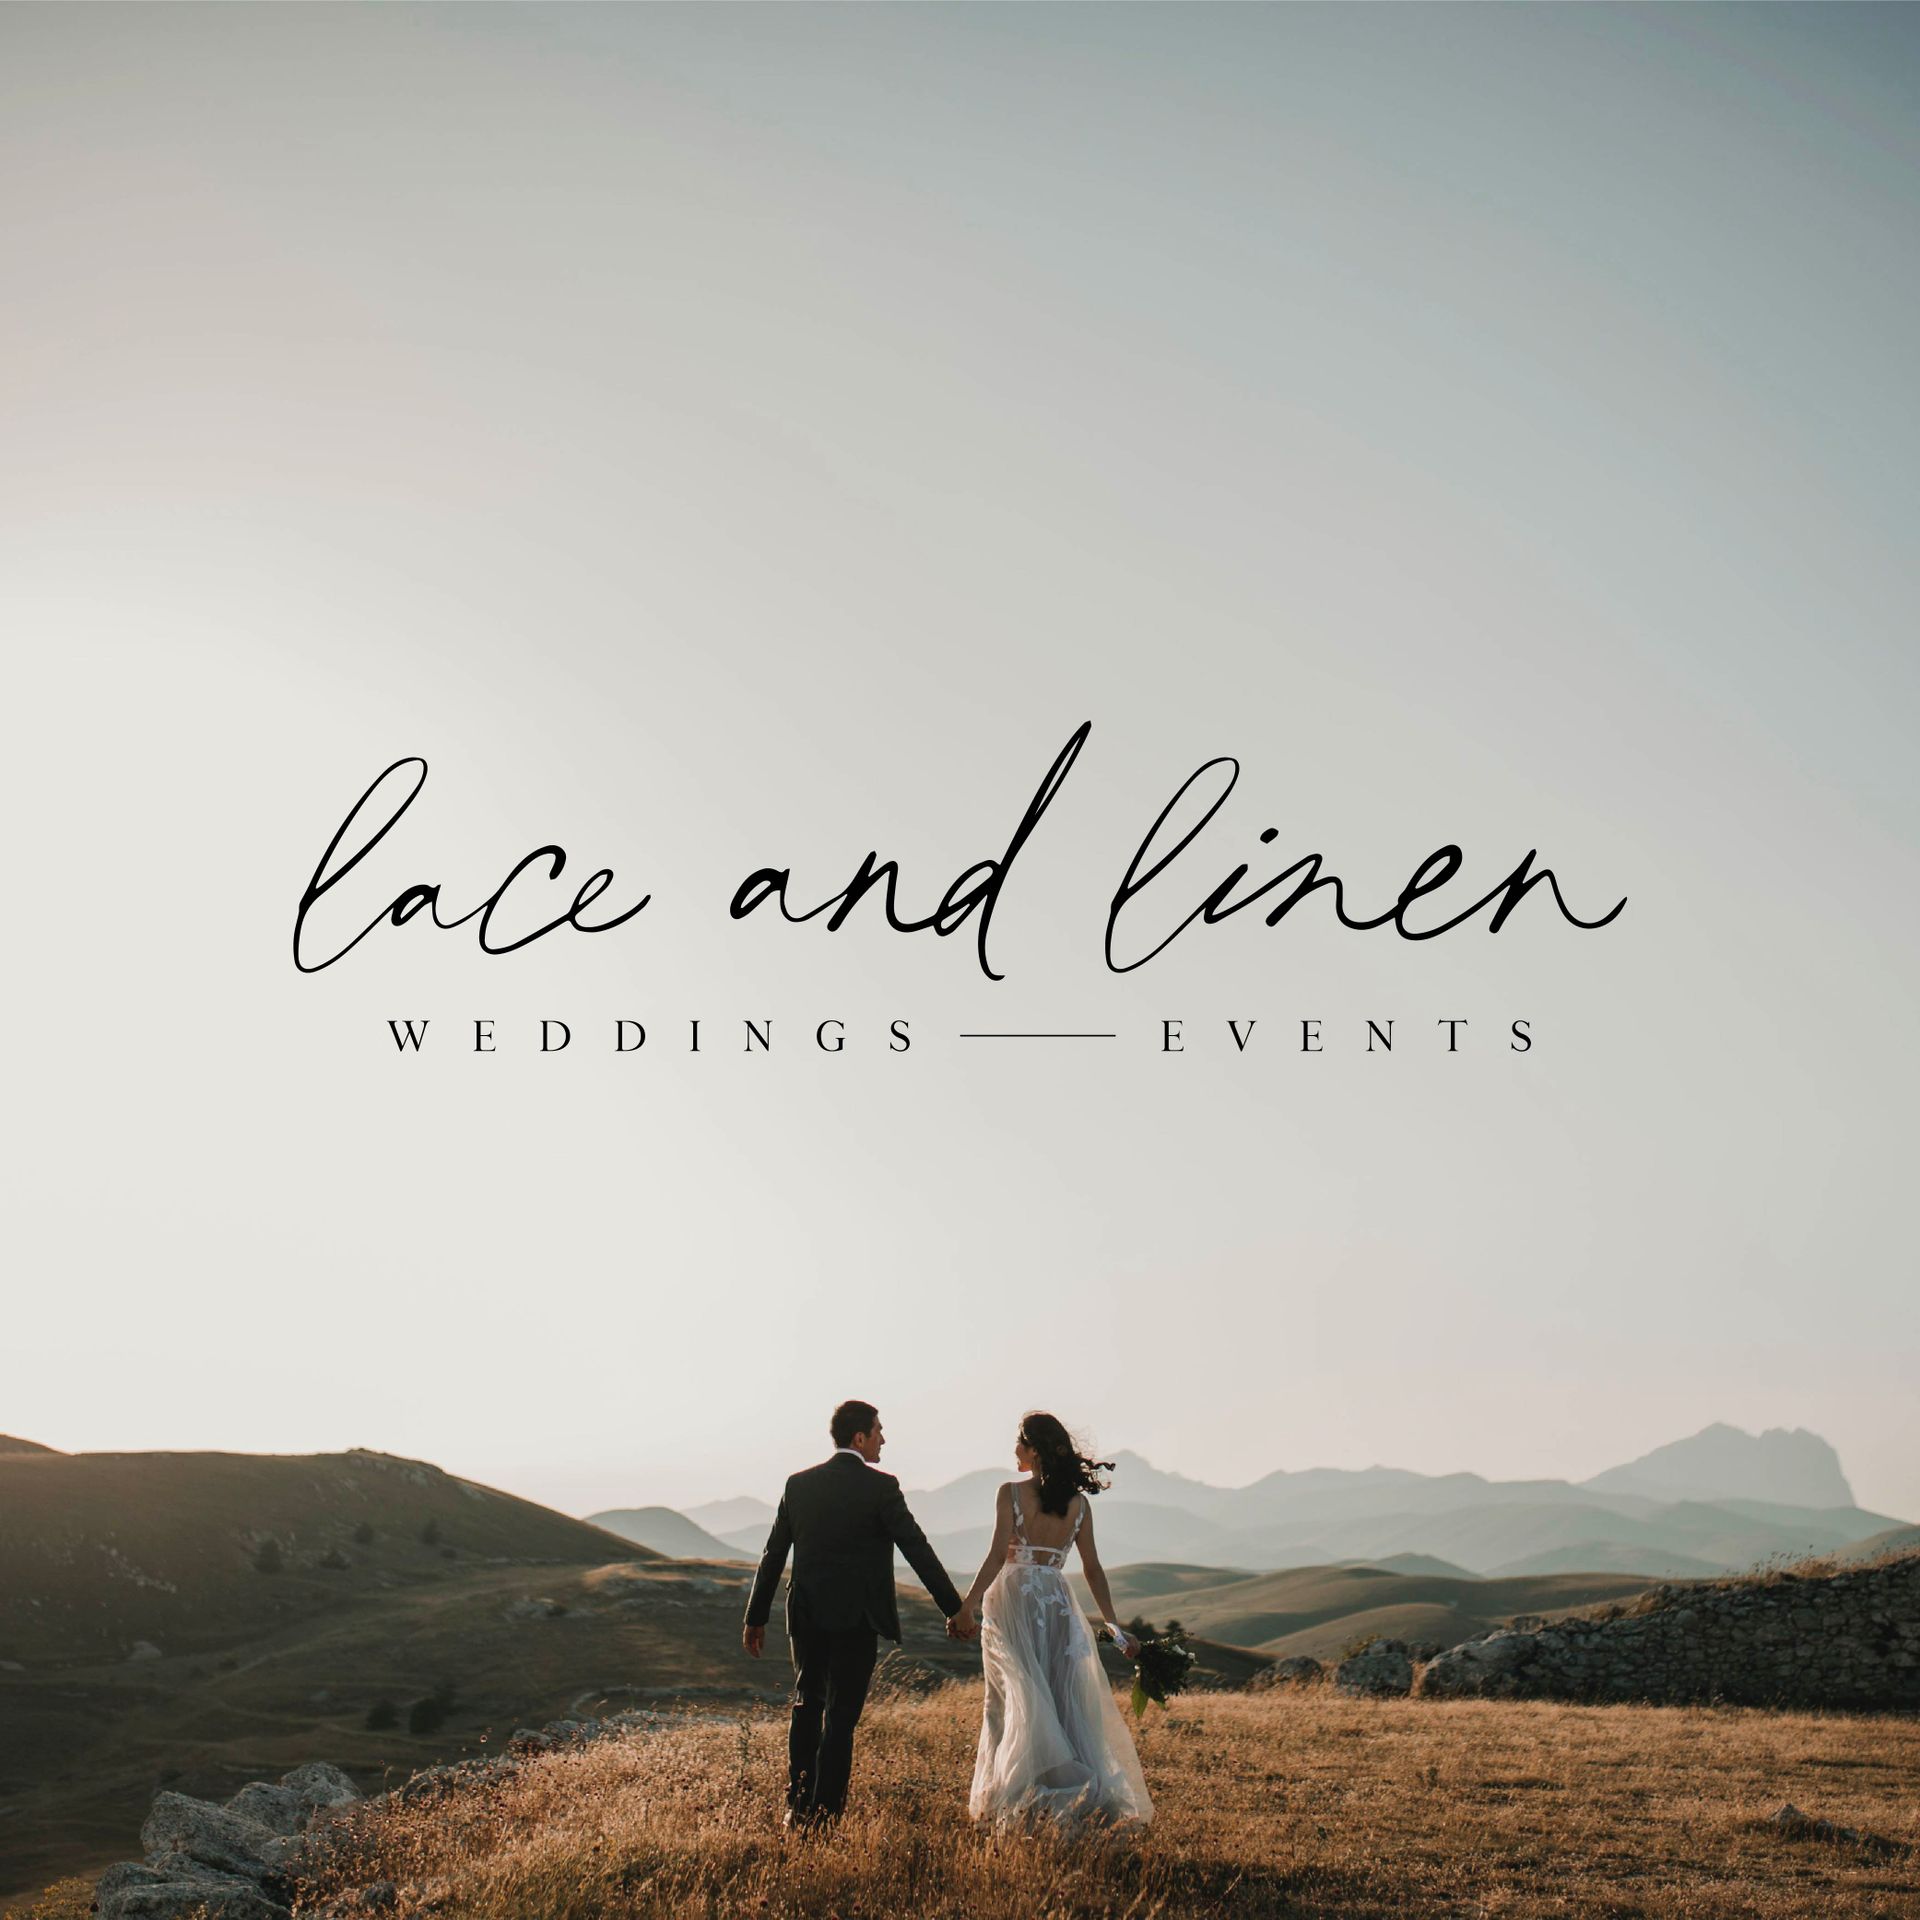 The logo for lace and linen weddings events shows a bride and groom walking in a field.